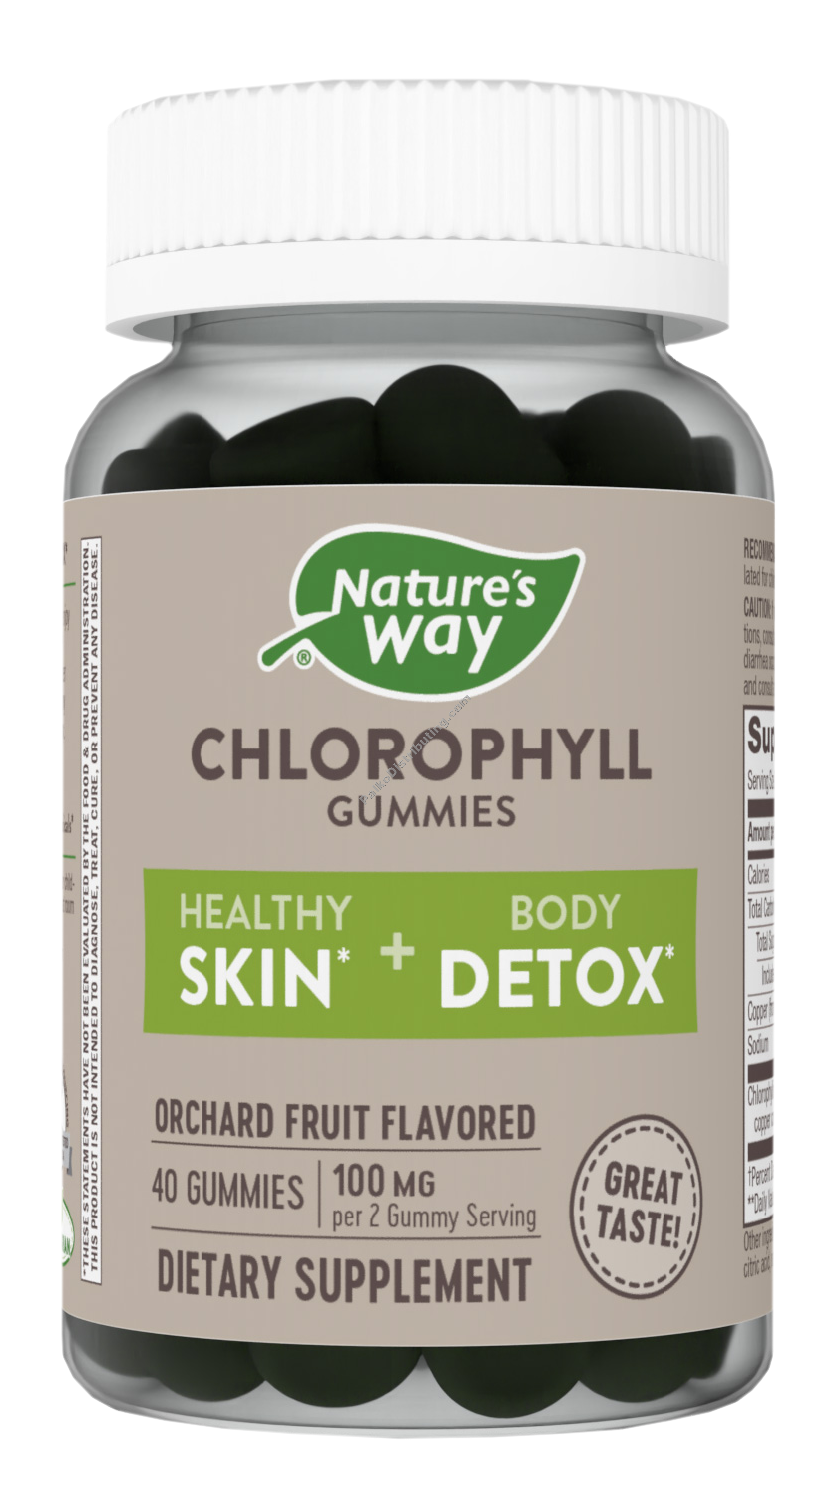 Product Image: Chlorophyll Gummies